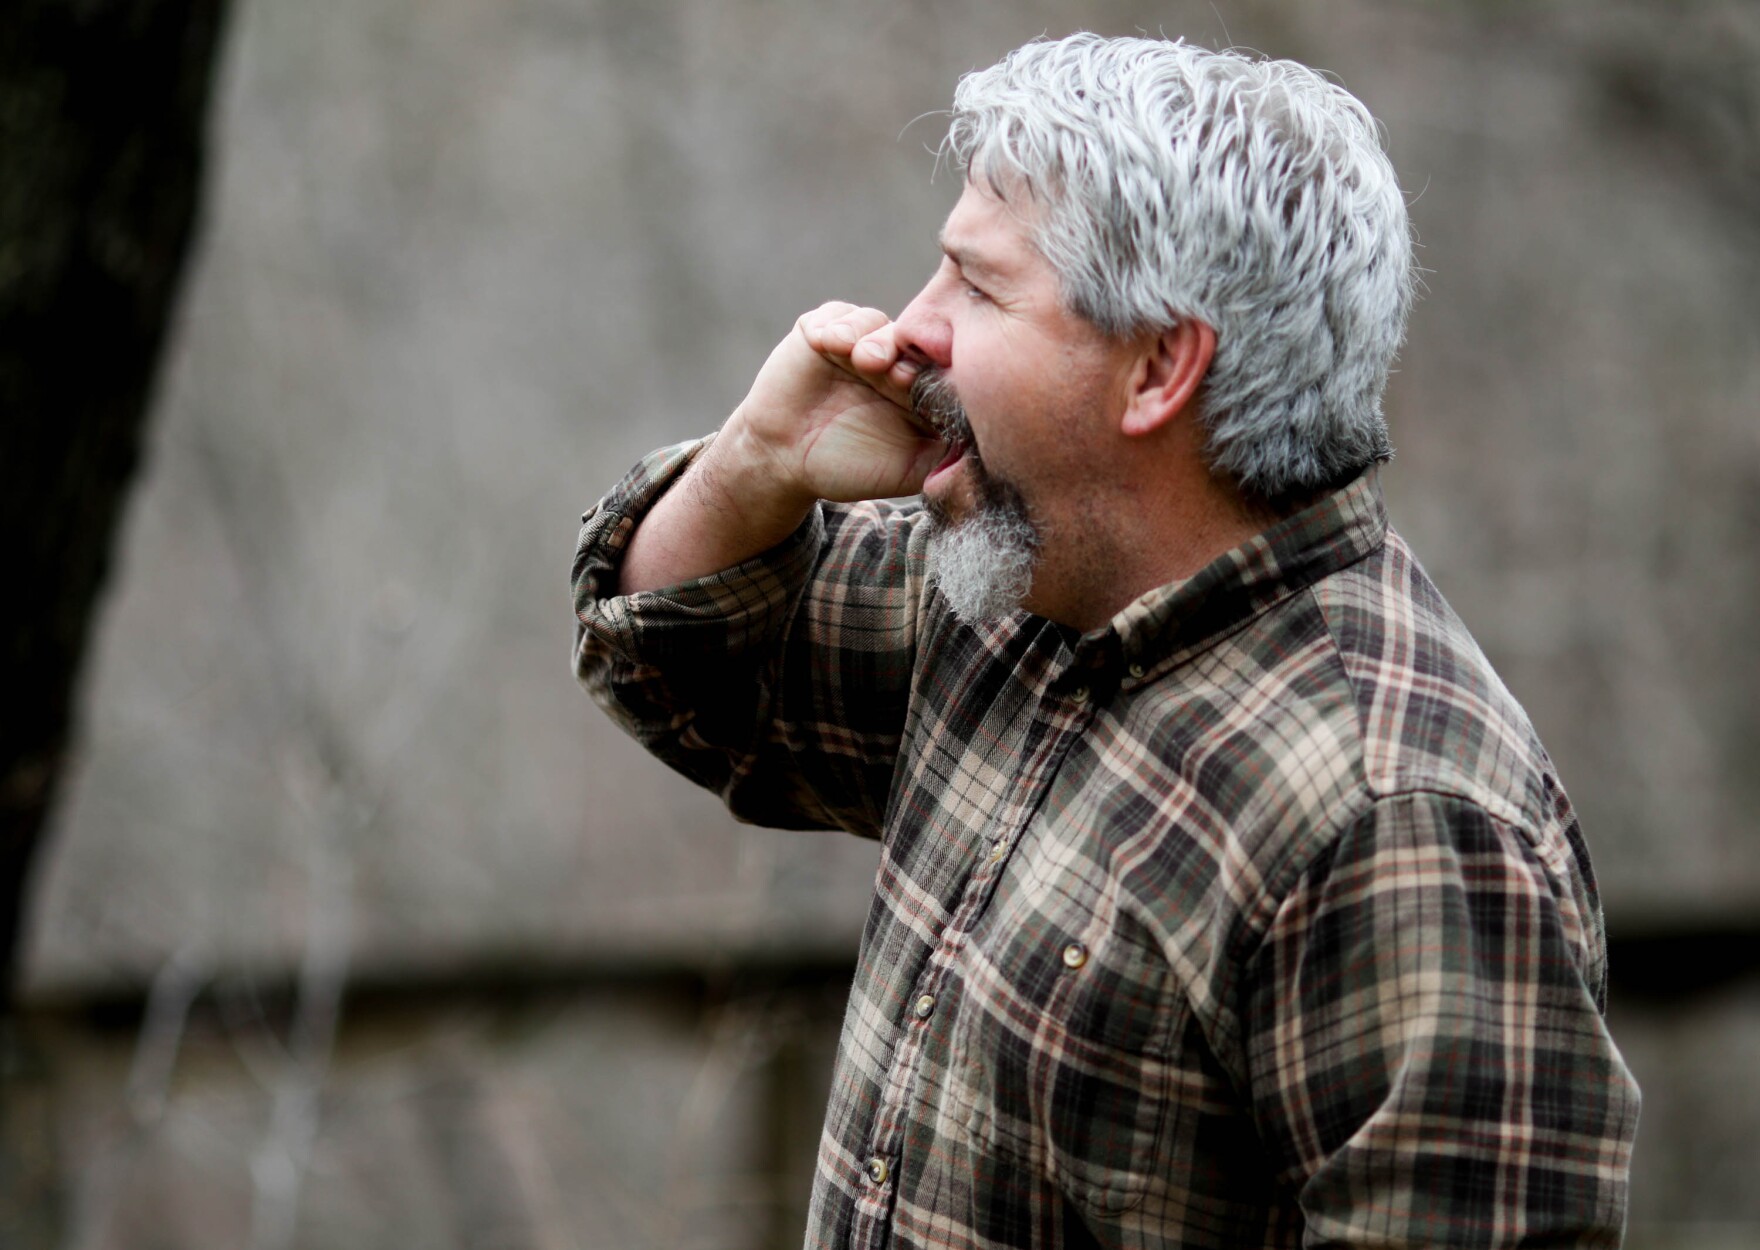 A man talking on the phone outdoors, looking away from the camera